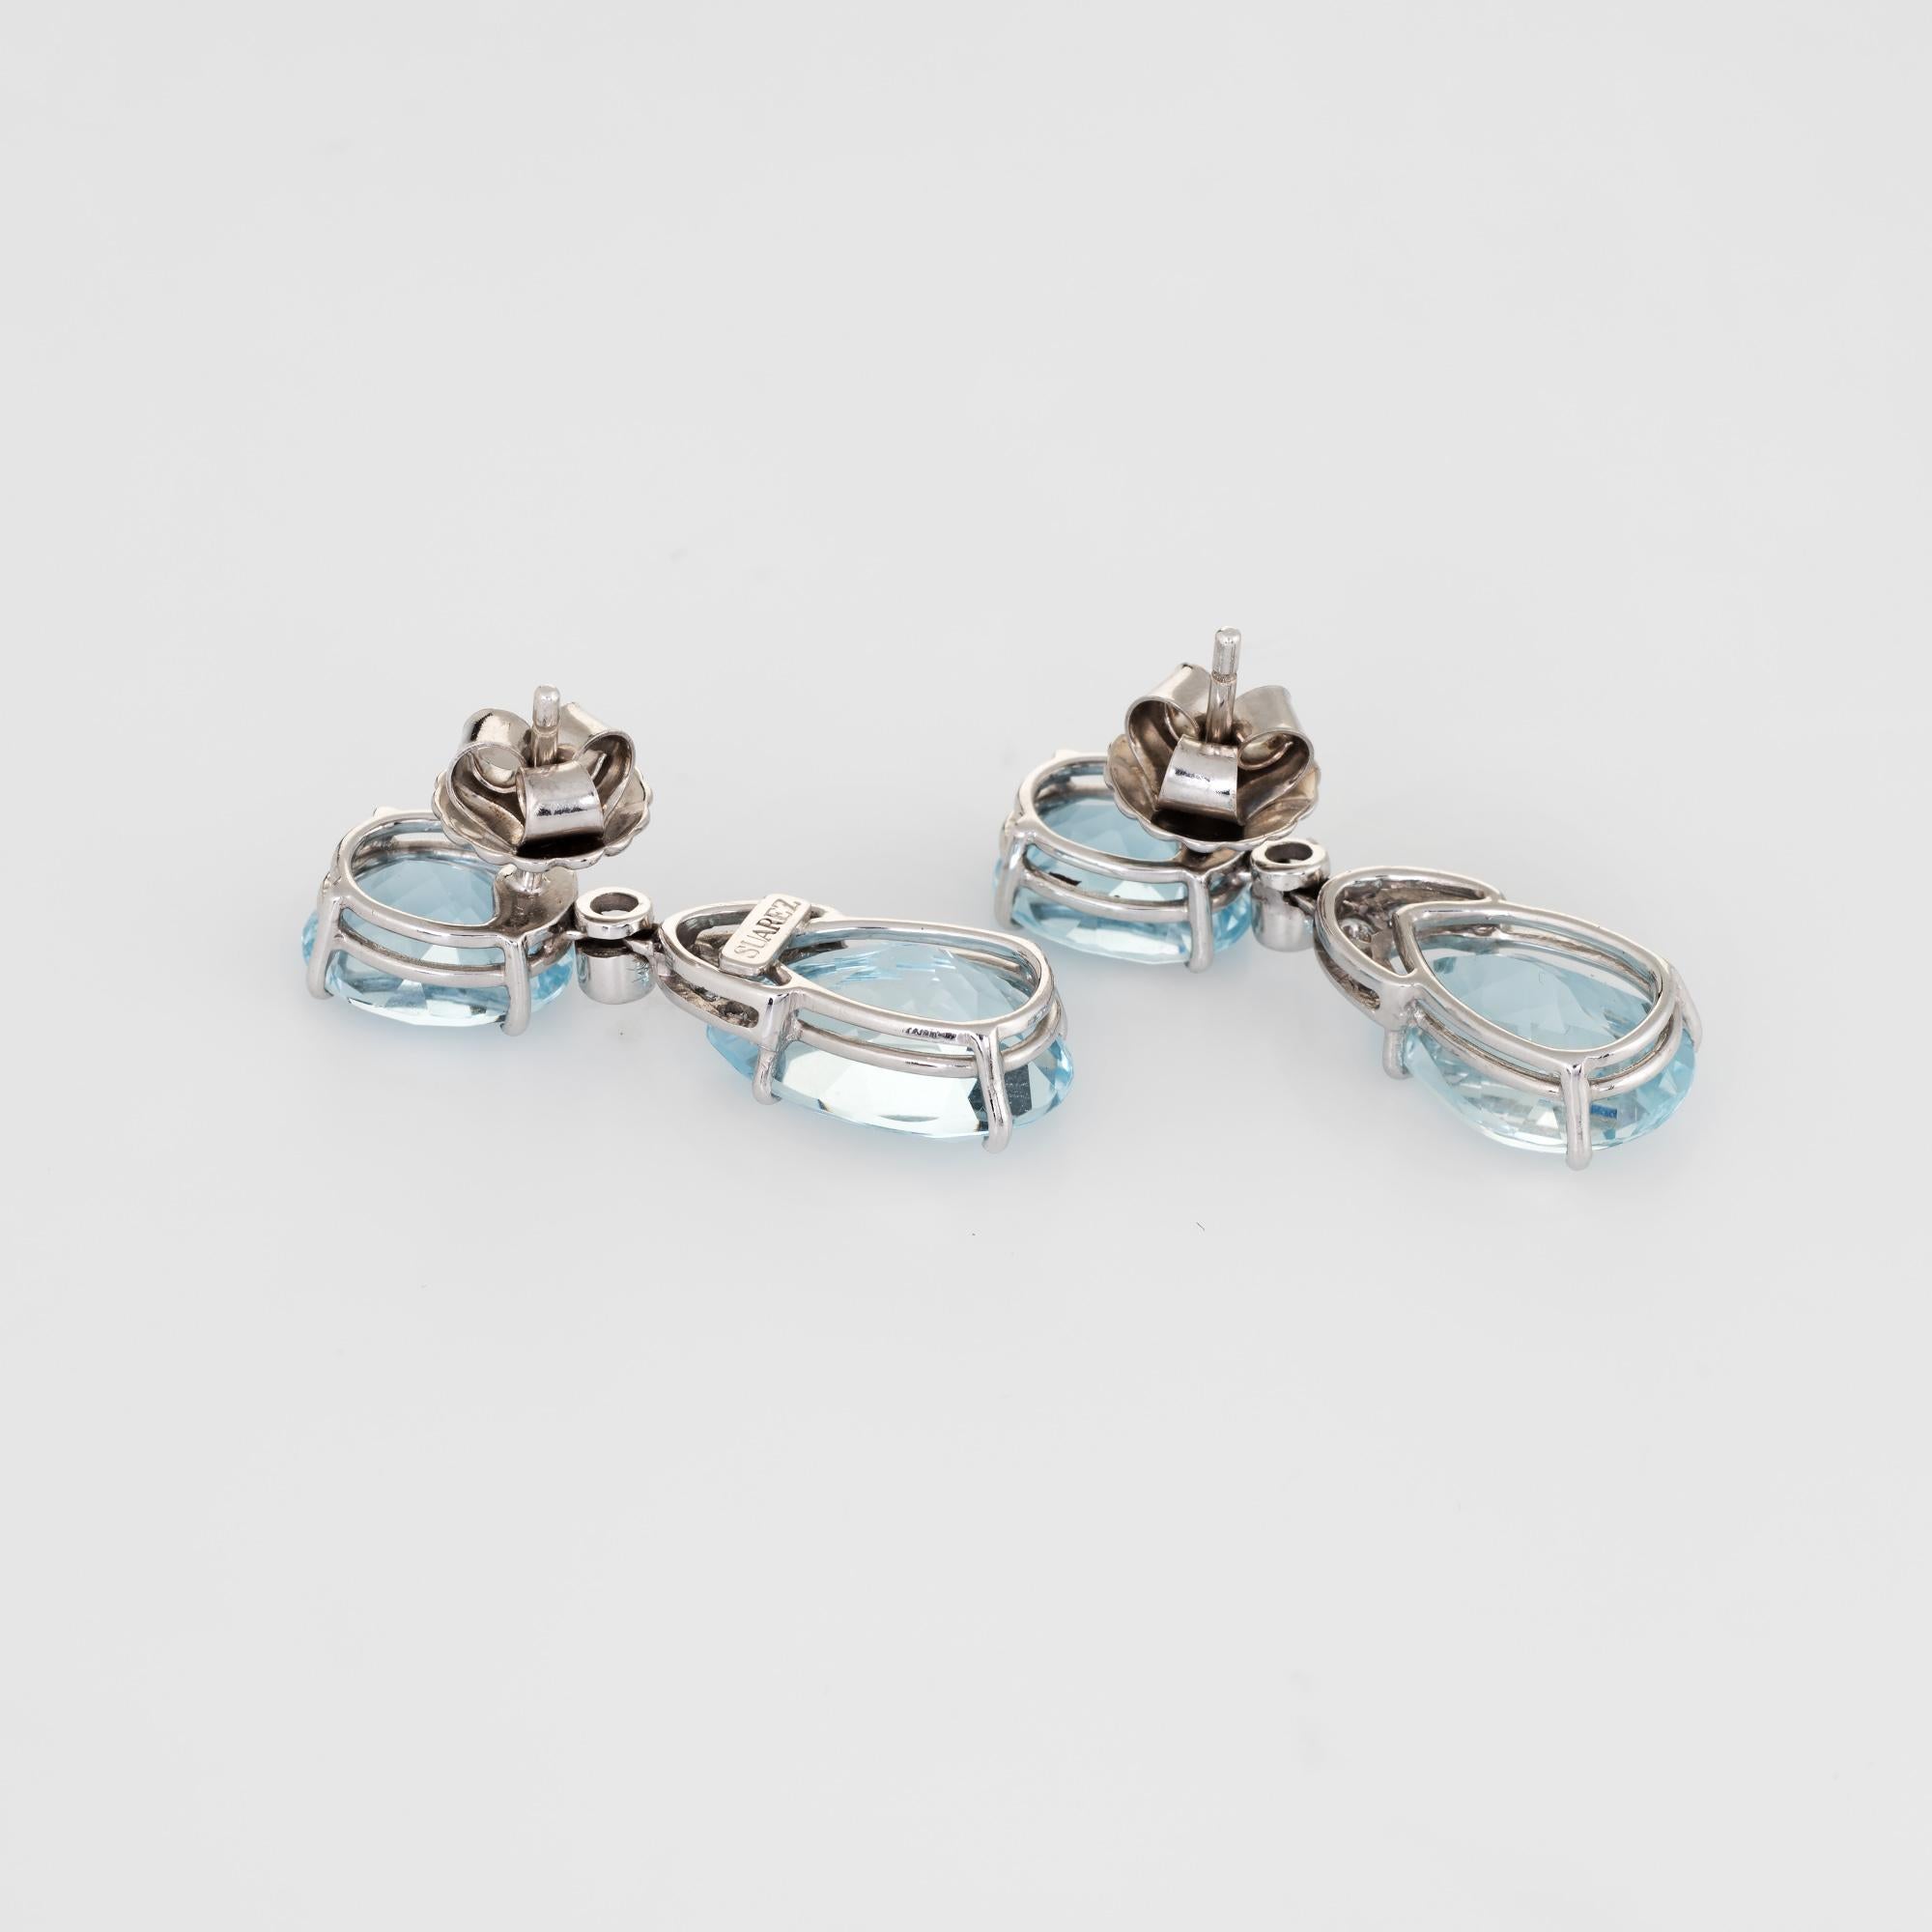 Stylish pair of Suarez aquamarine & diamond drop earrings crafted in 18k white gold. 

Aquamarines measure 11mm x 9mm (estimated at 3.50 carats each - 7 carats total estimated weight). The lower pear cut aquamarines measure 15mm x 10mm (estimated at